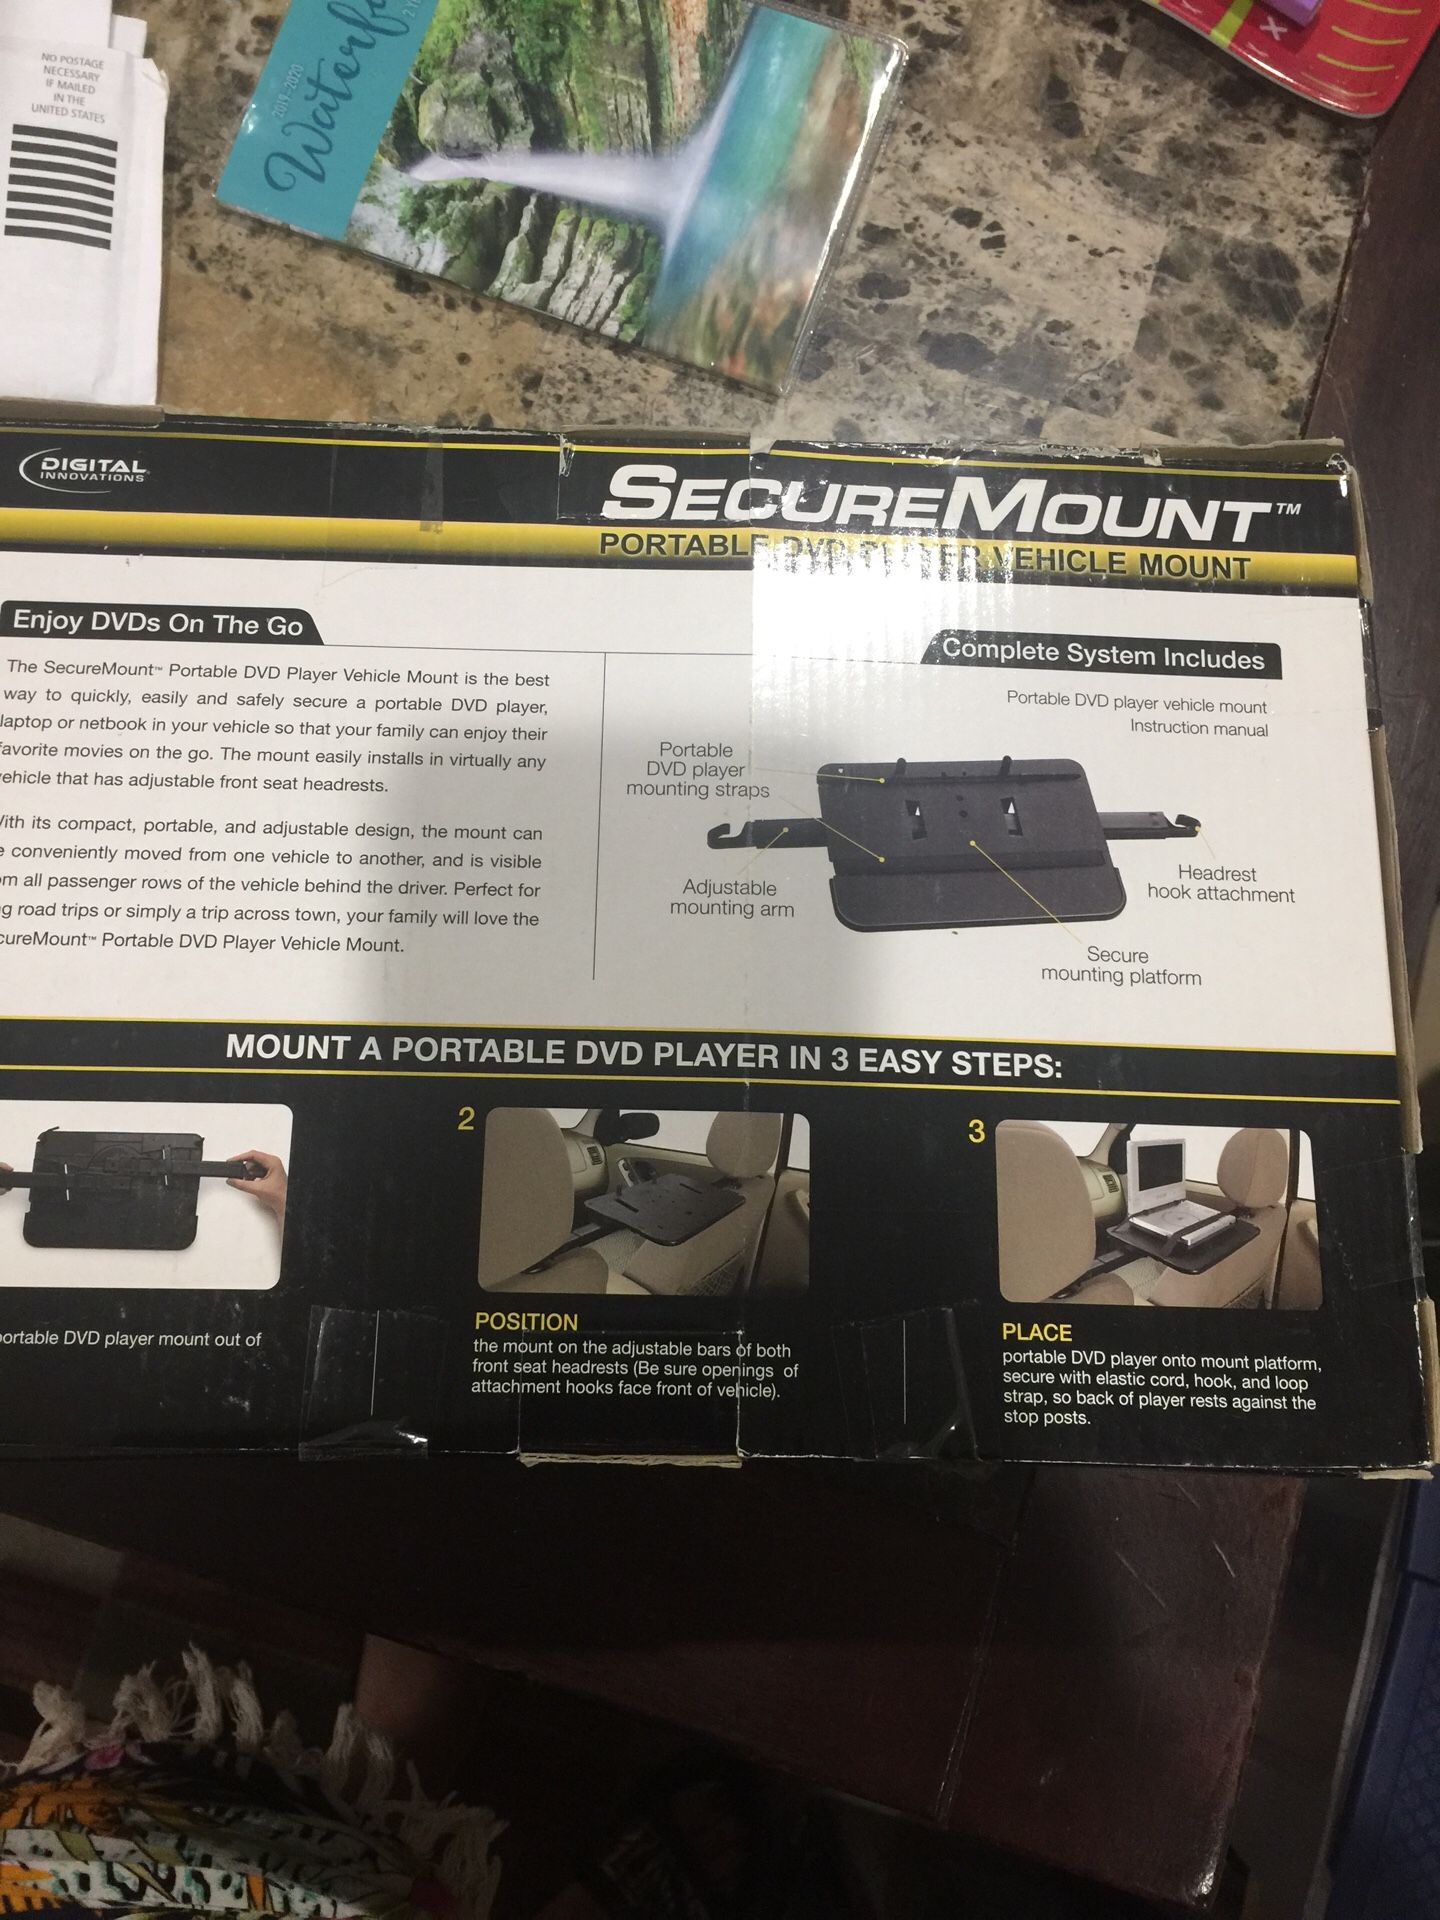 Secure mount portable DVD’s player vehicle mount